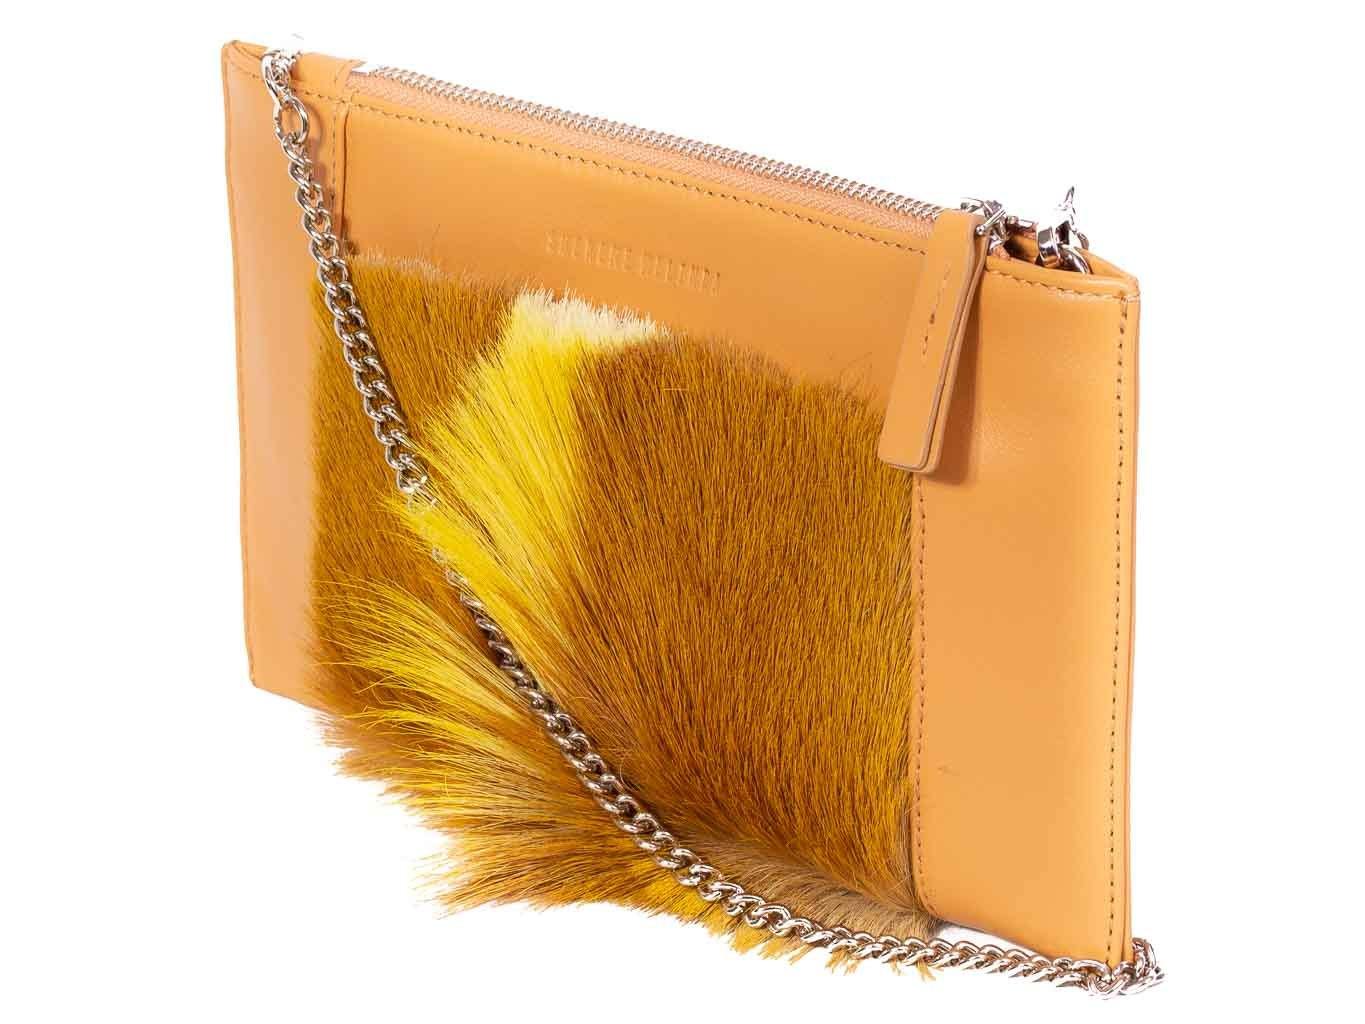 Clutch Springbok Handbag in Sunflower Yellow with a fan feature by Sherene Melinda side angle strap